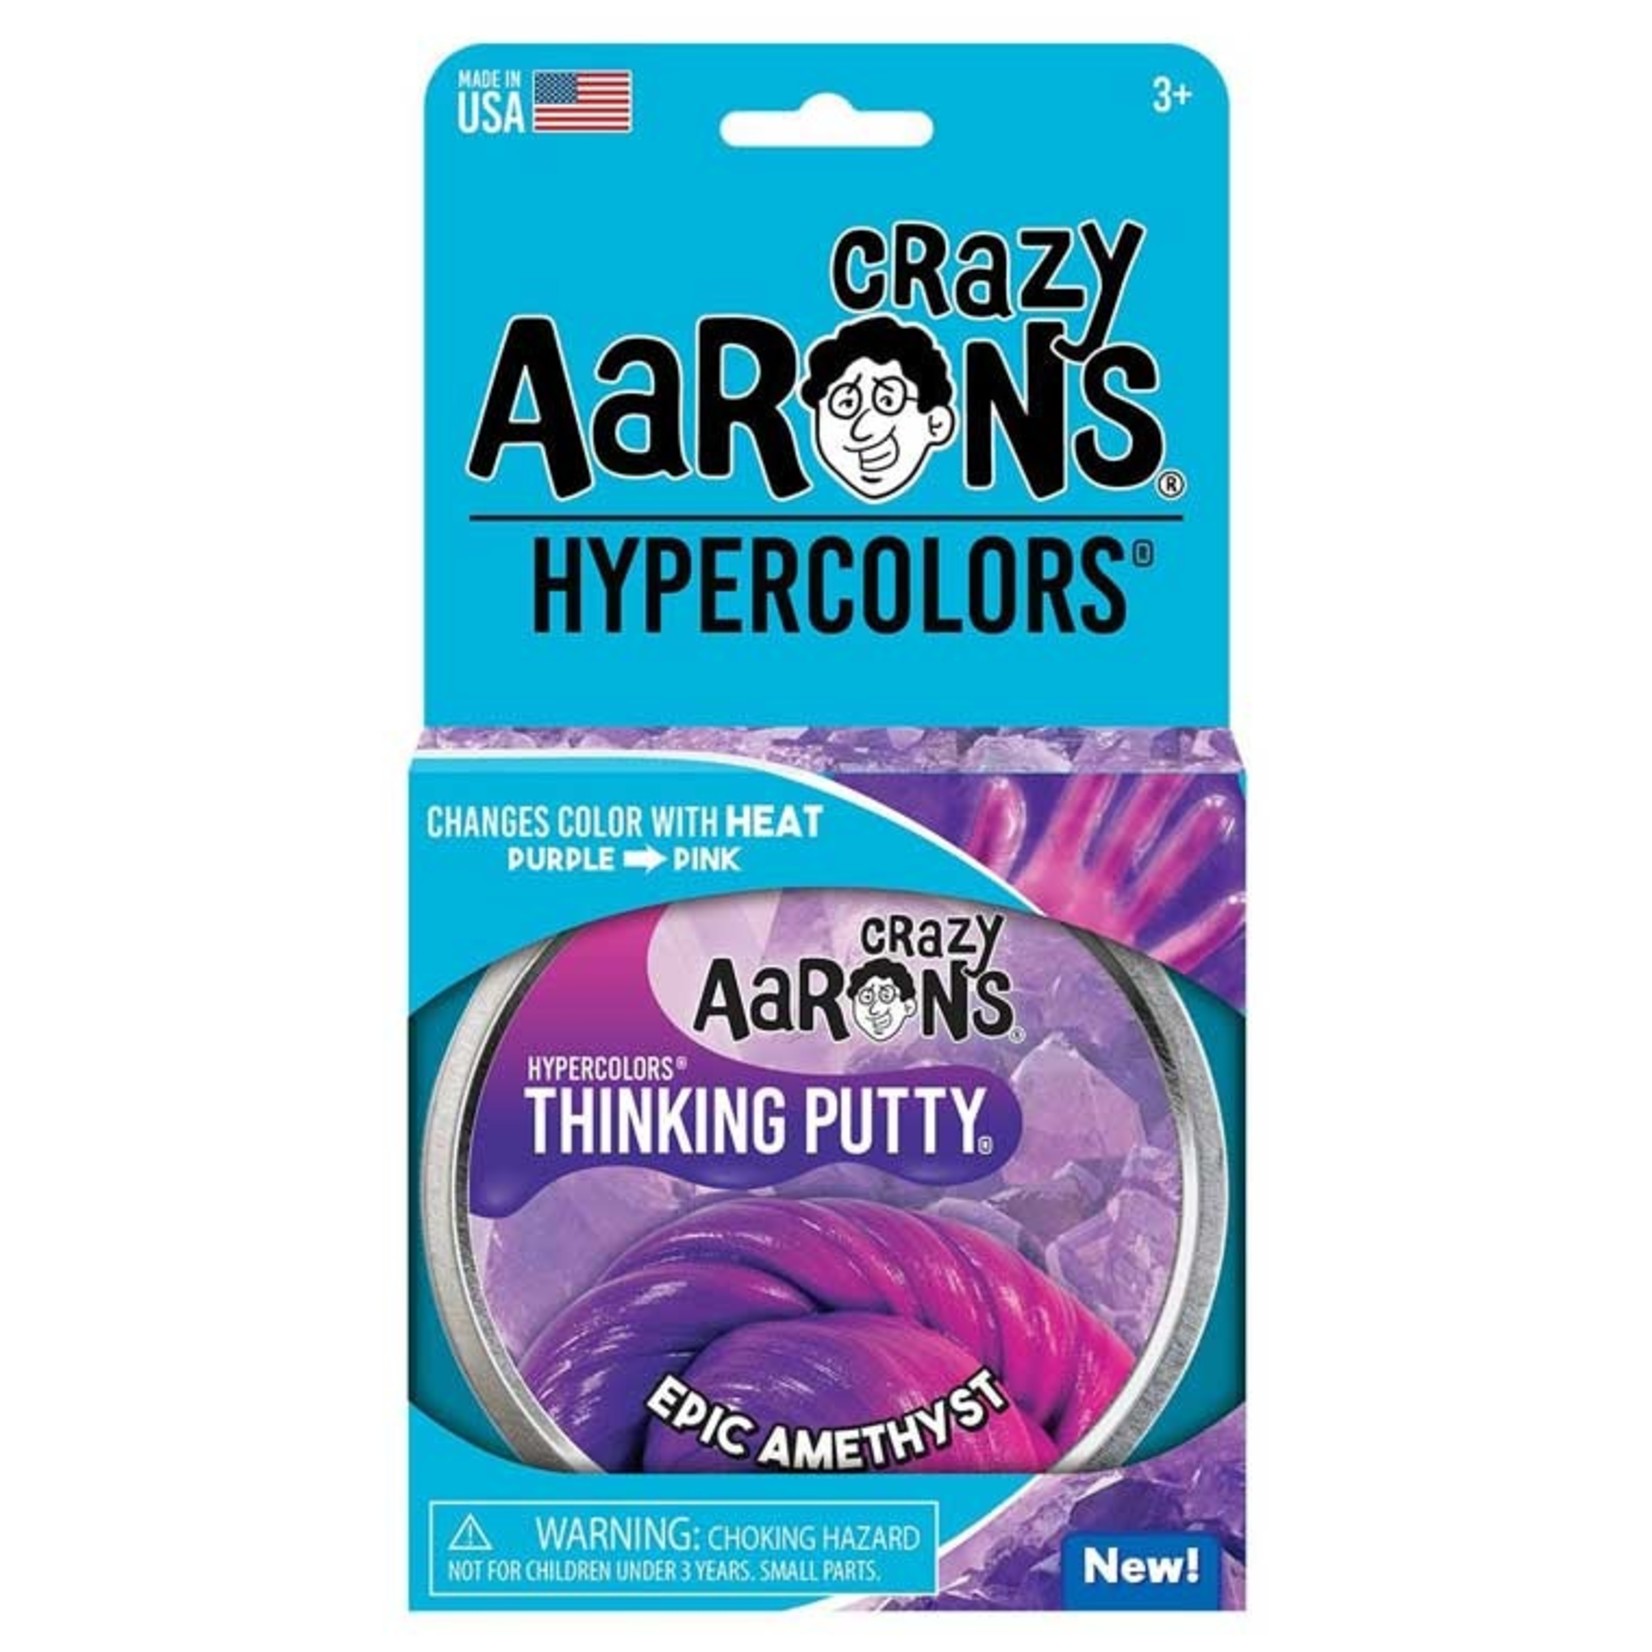 Crazy Aaron's Epic Amethyst Thinking Putty